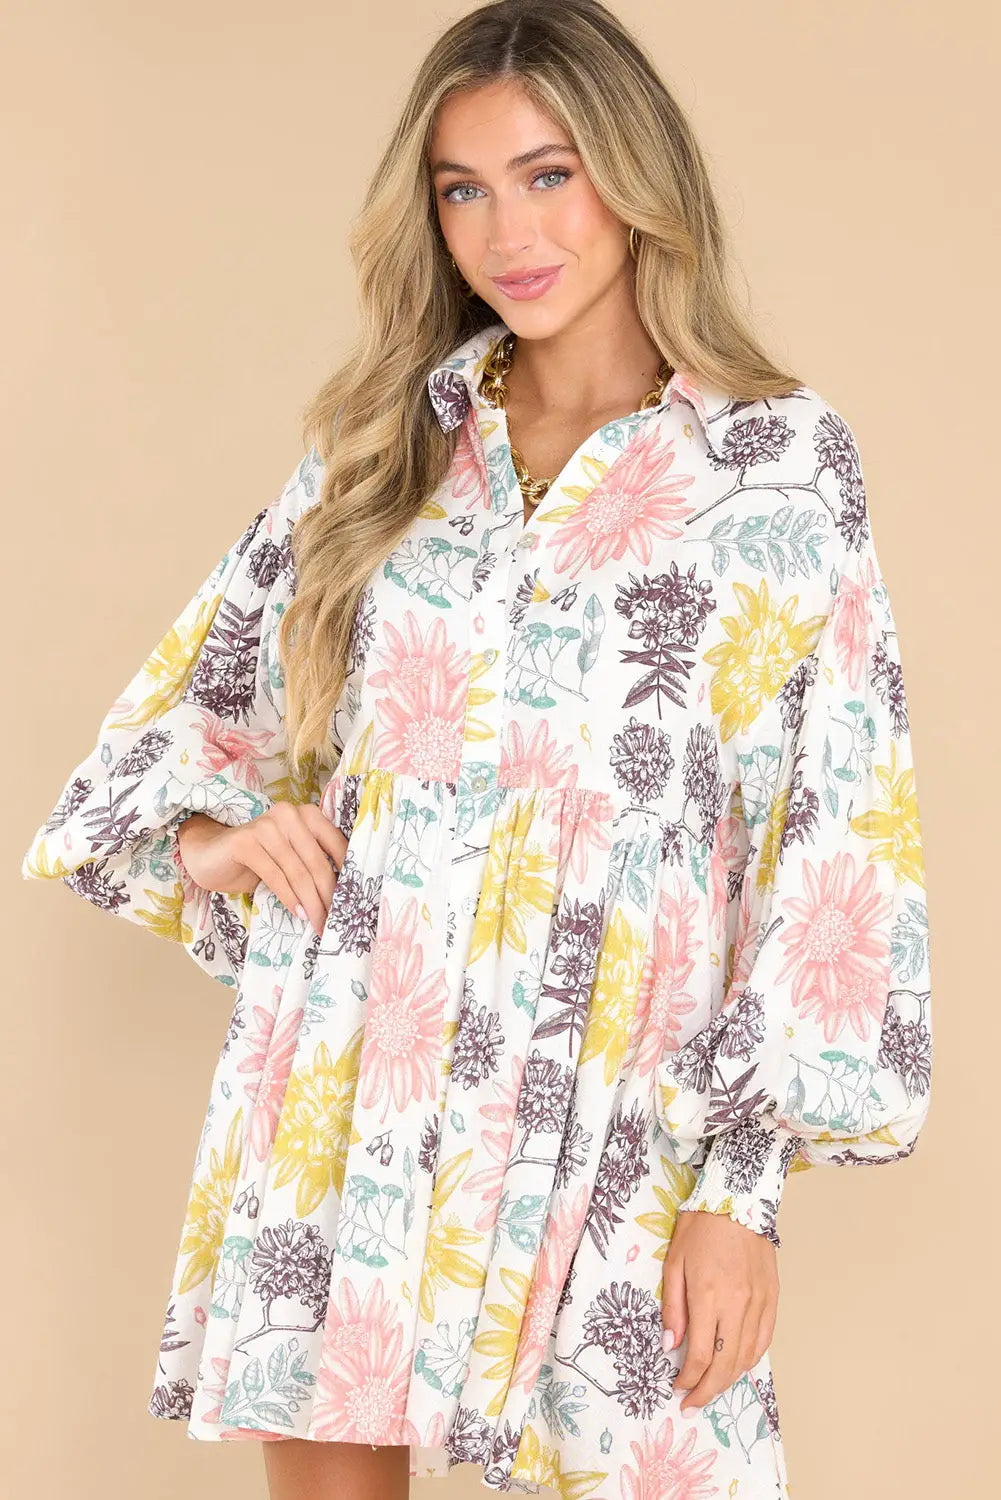 White collared neck bubble sleeve floral dress - dresses